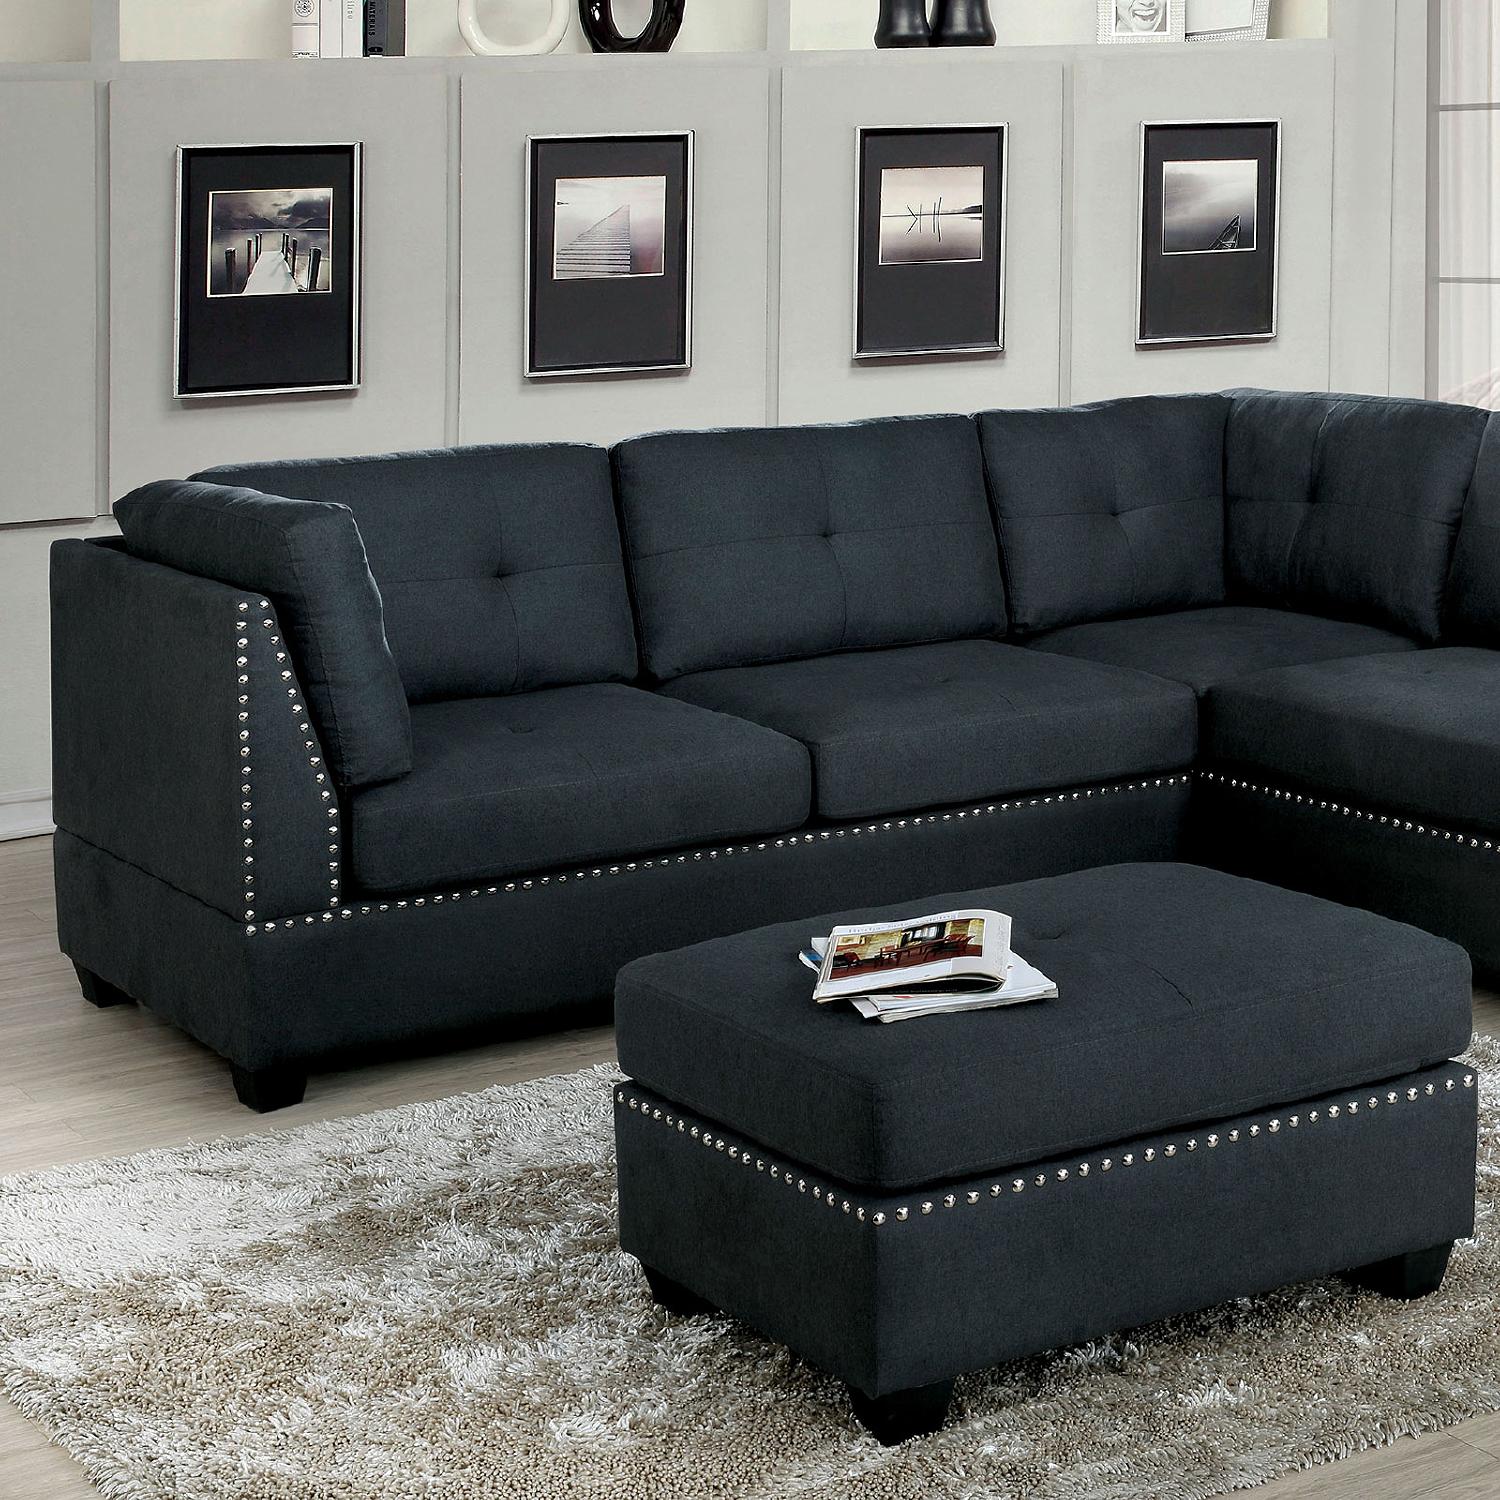 Transitional Sectional Sofa and Ottoman CM6966-2PC Lita CM6966-2PC in Dark Gray 